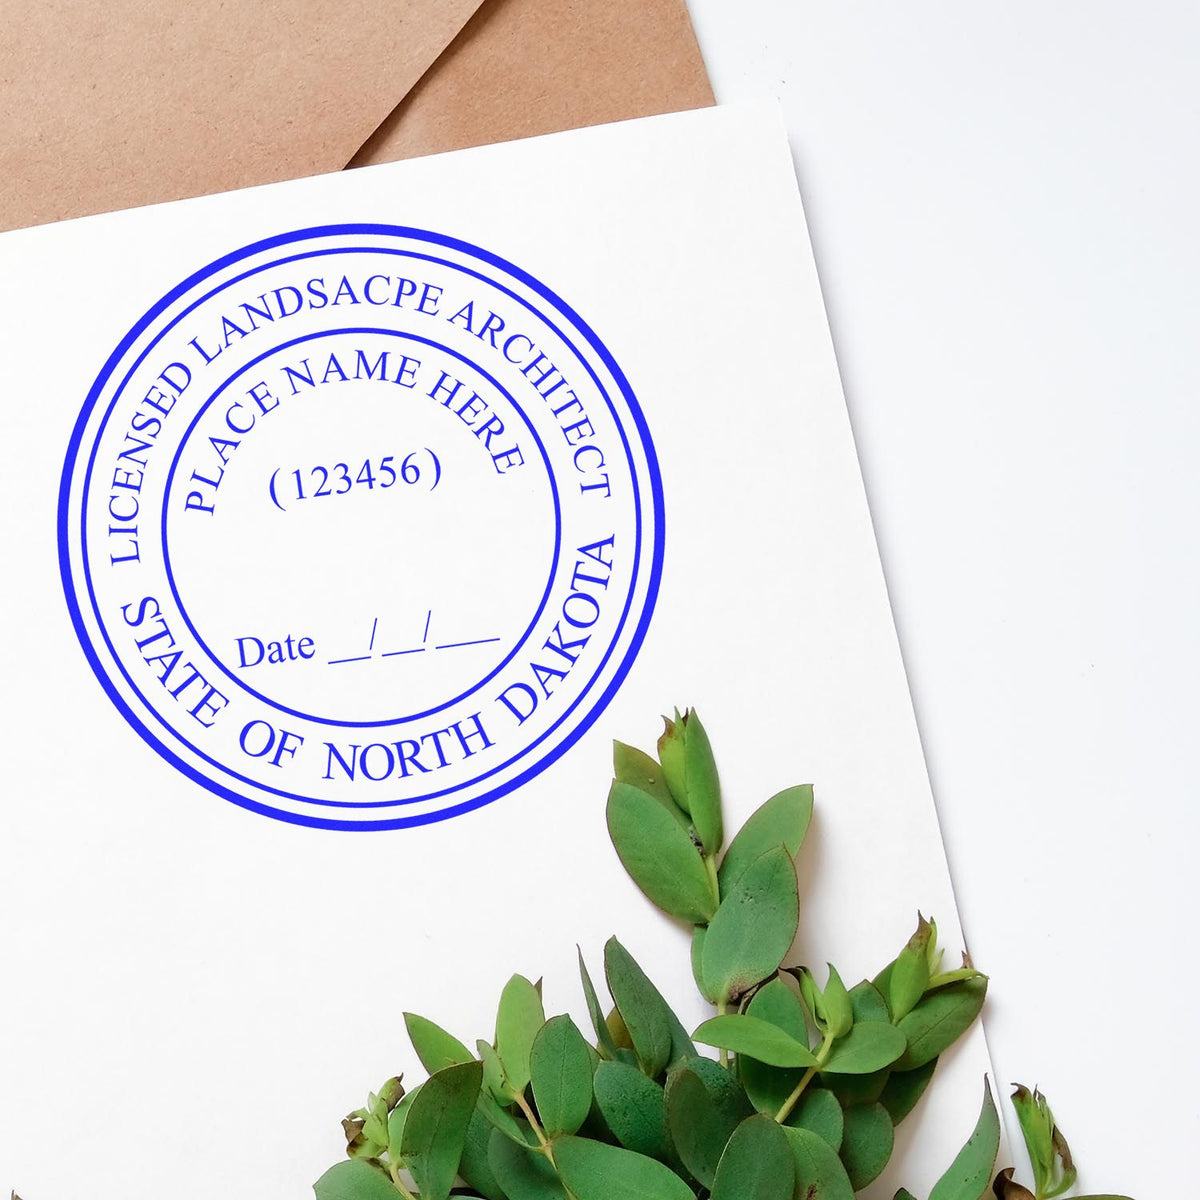 This paper is stamped with a sample imprint of the Self-Inking North Dakota Landscape Architect Stamp, signifying its quality and reliability.